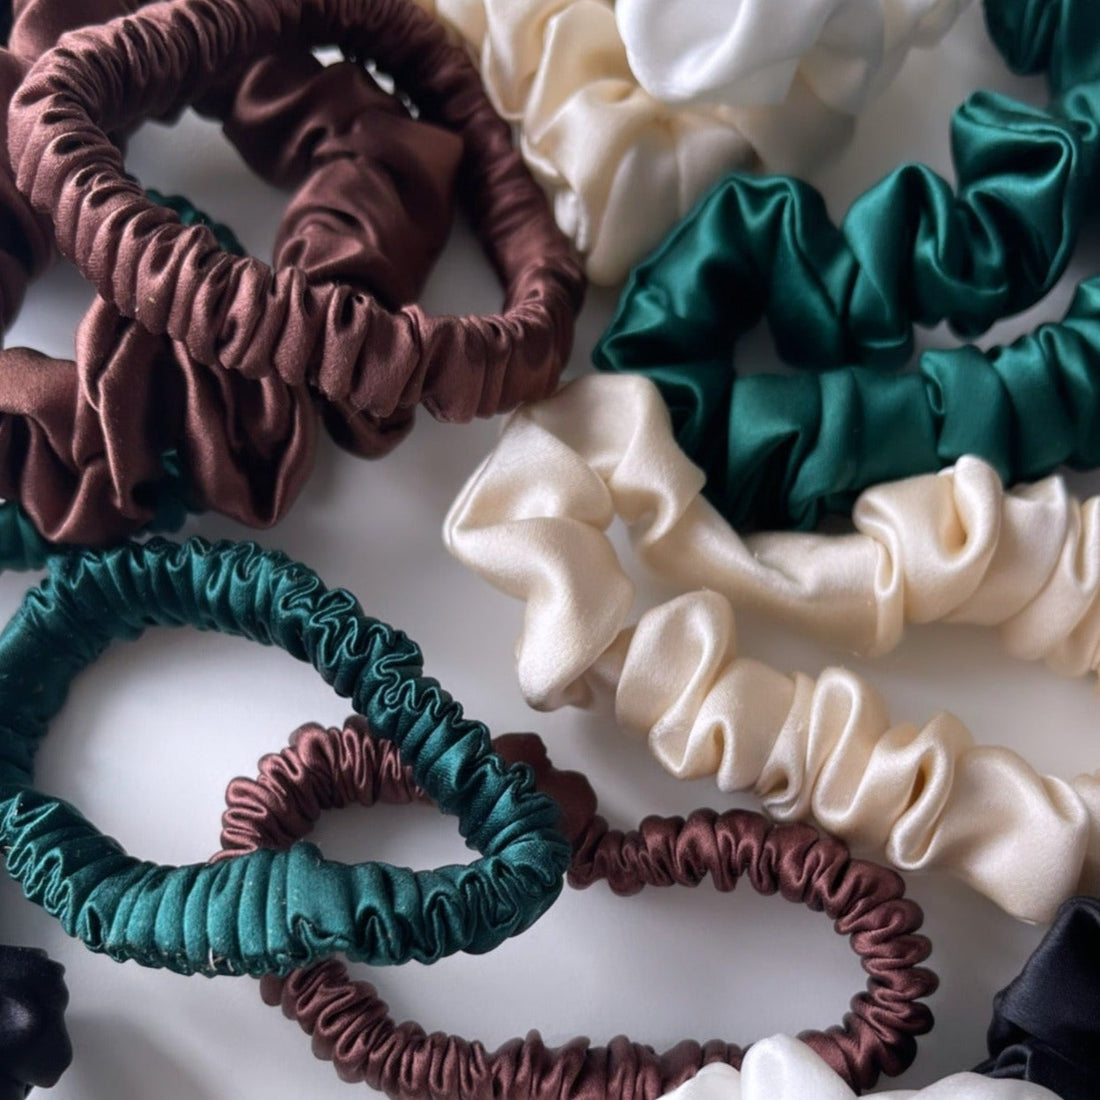 TRY A SCRUNCHIE FOR FREE!